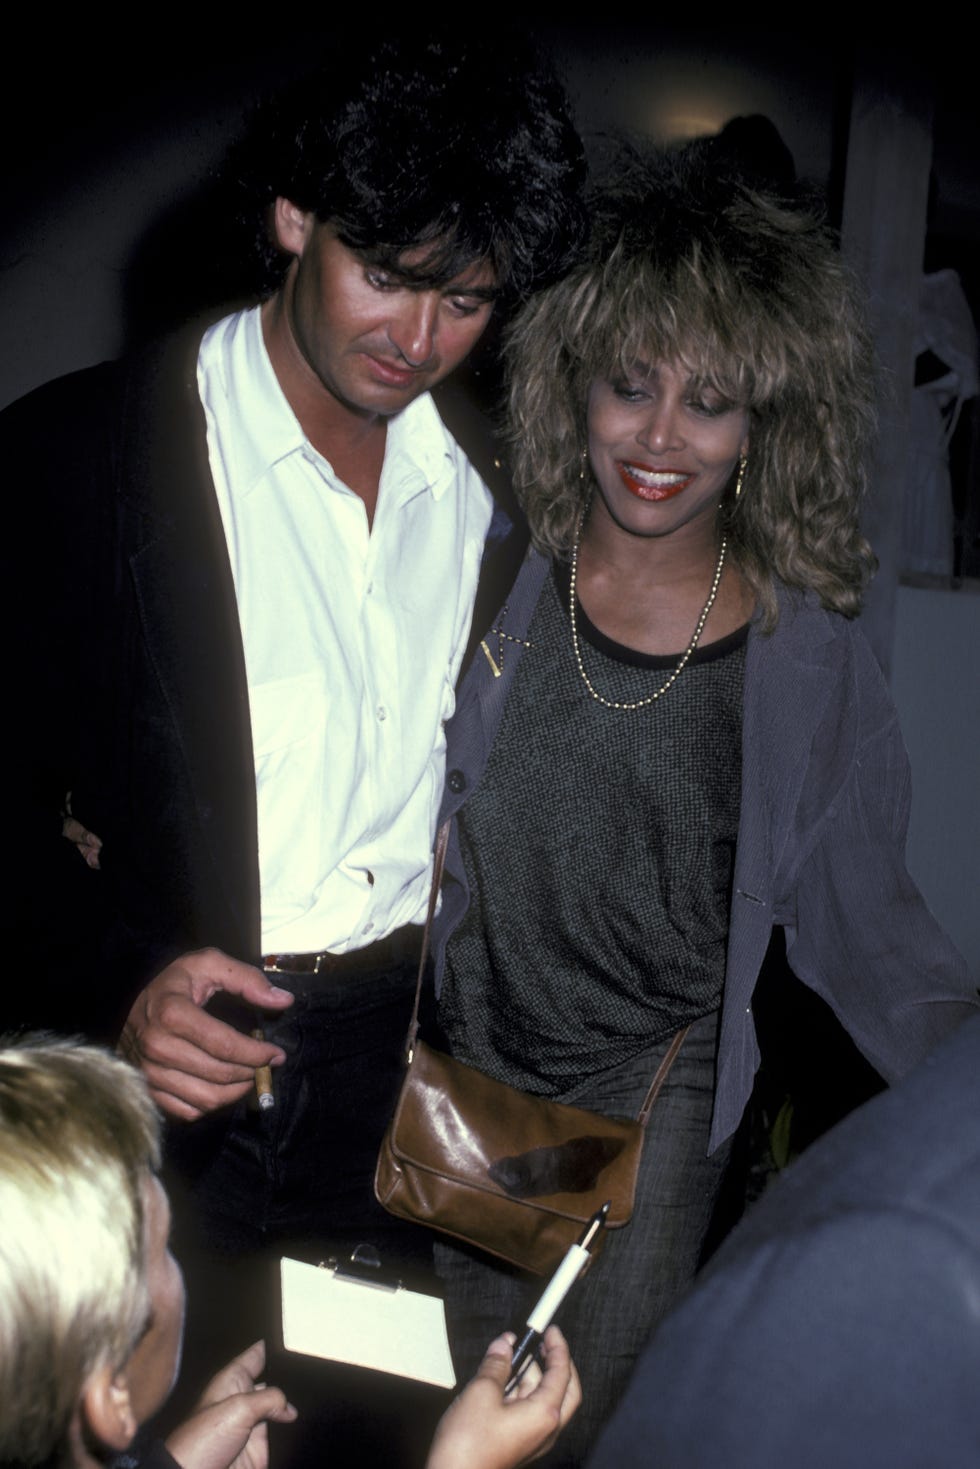 tina turner at spago's restaurant in hollywood, california august 13, 1985